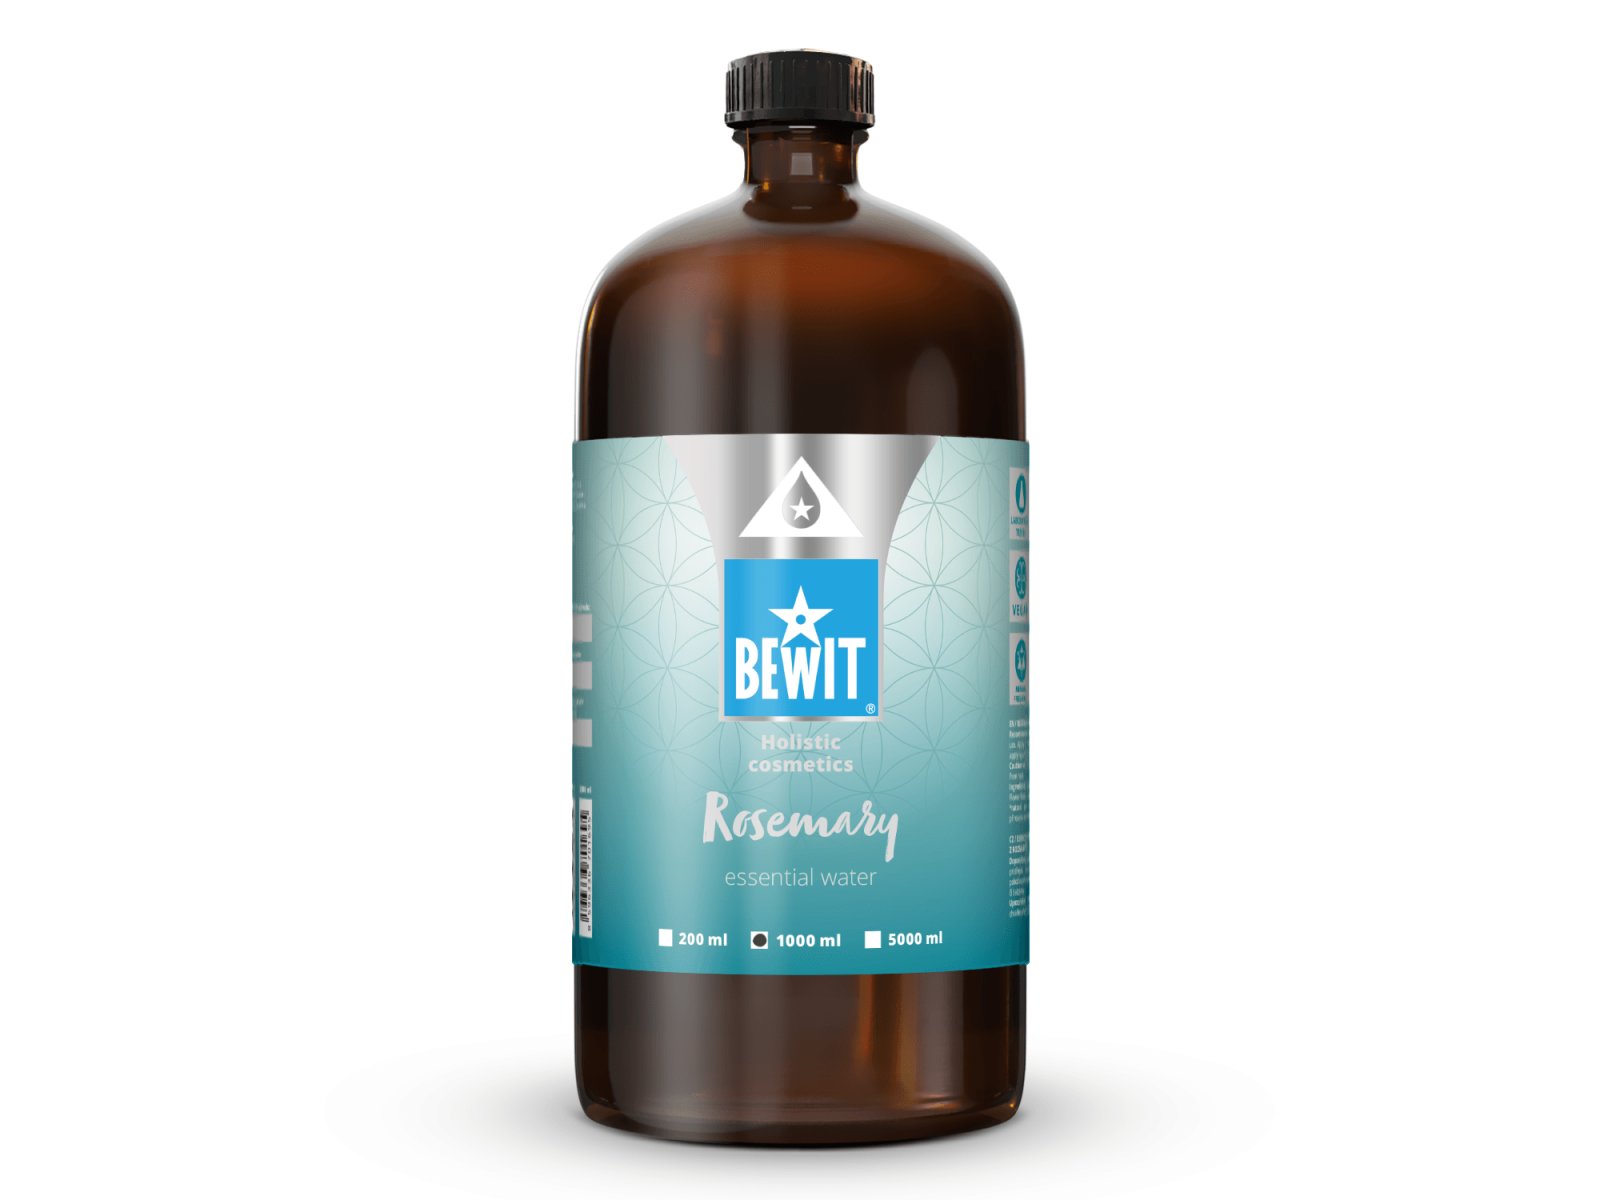 BEWIT Rosemary essential water - 100% NATURAL HYDROLYTE - 4